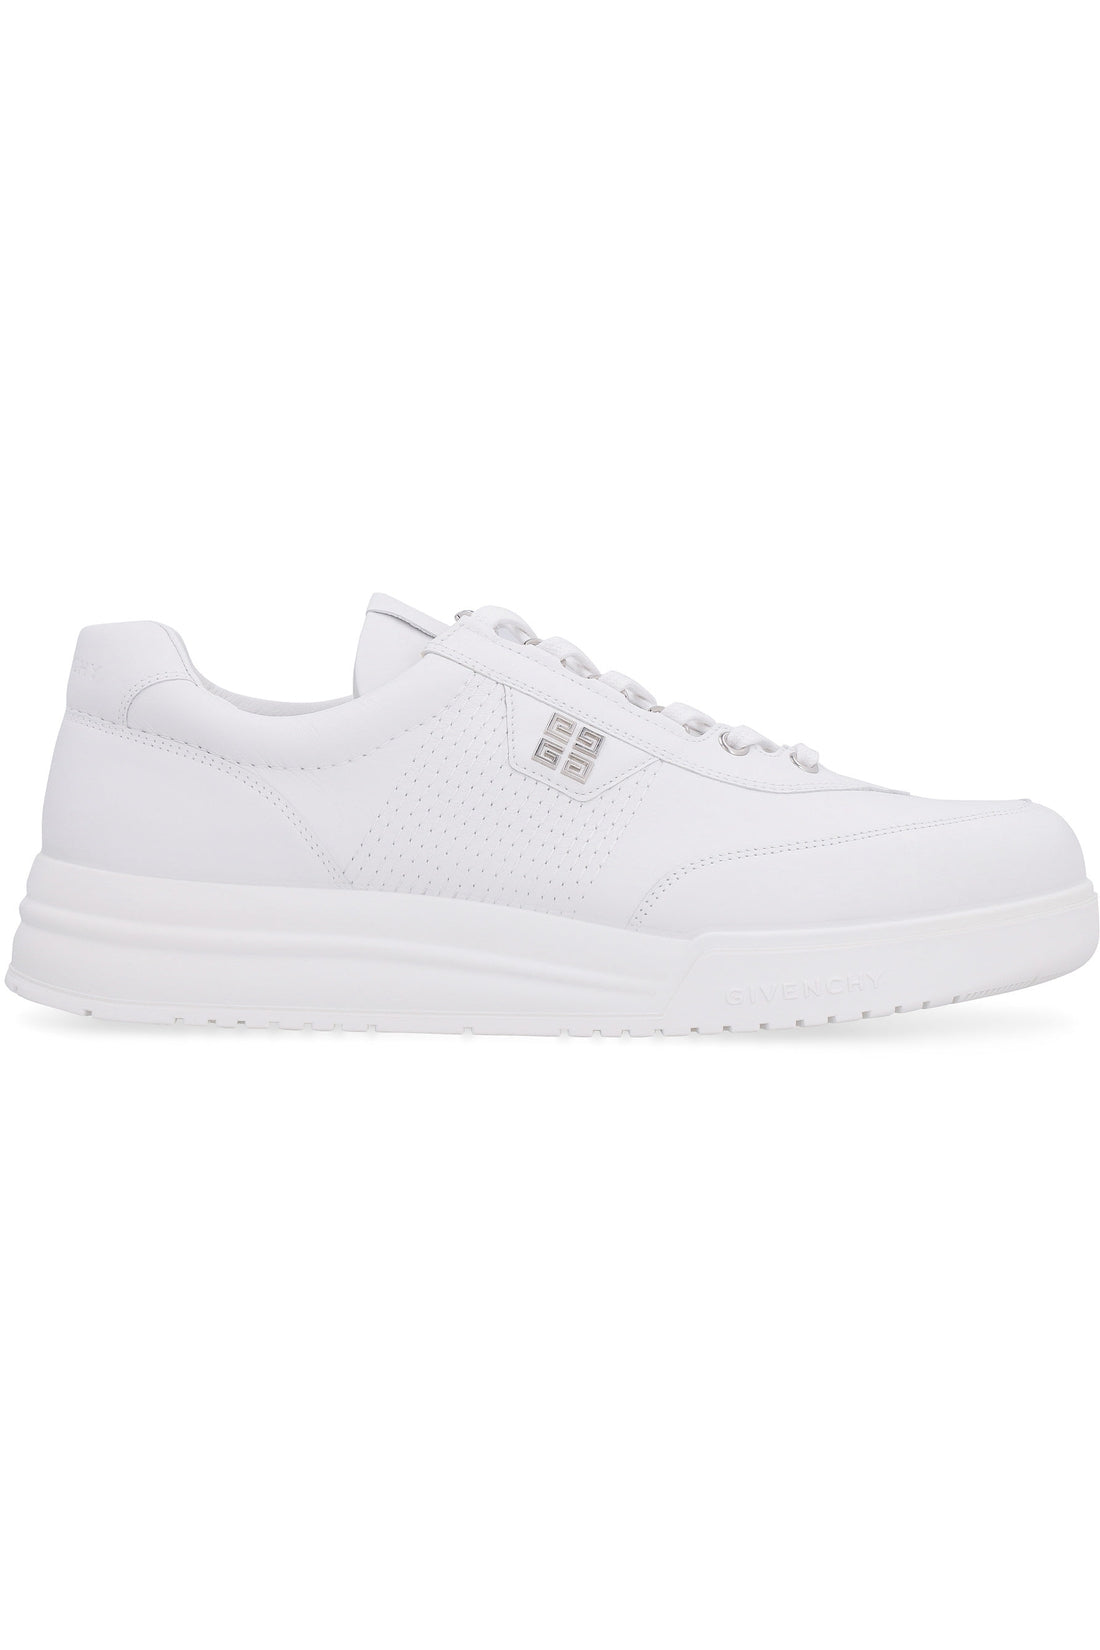 Givenchy-OUTLET-SALE-G4 leather low-top sneakers-ARCHIVIST